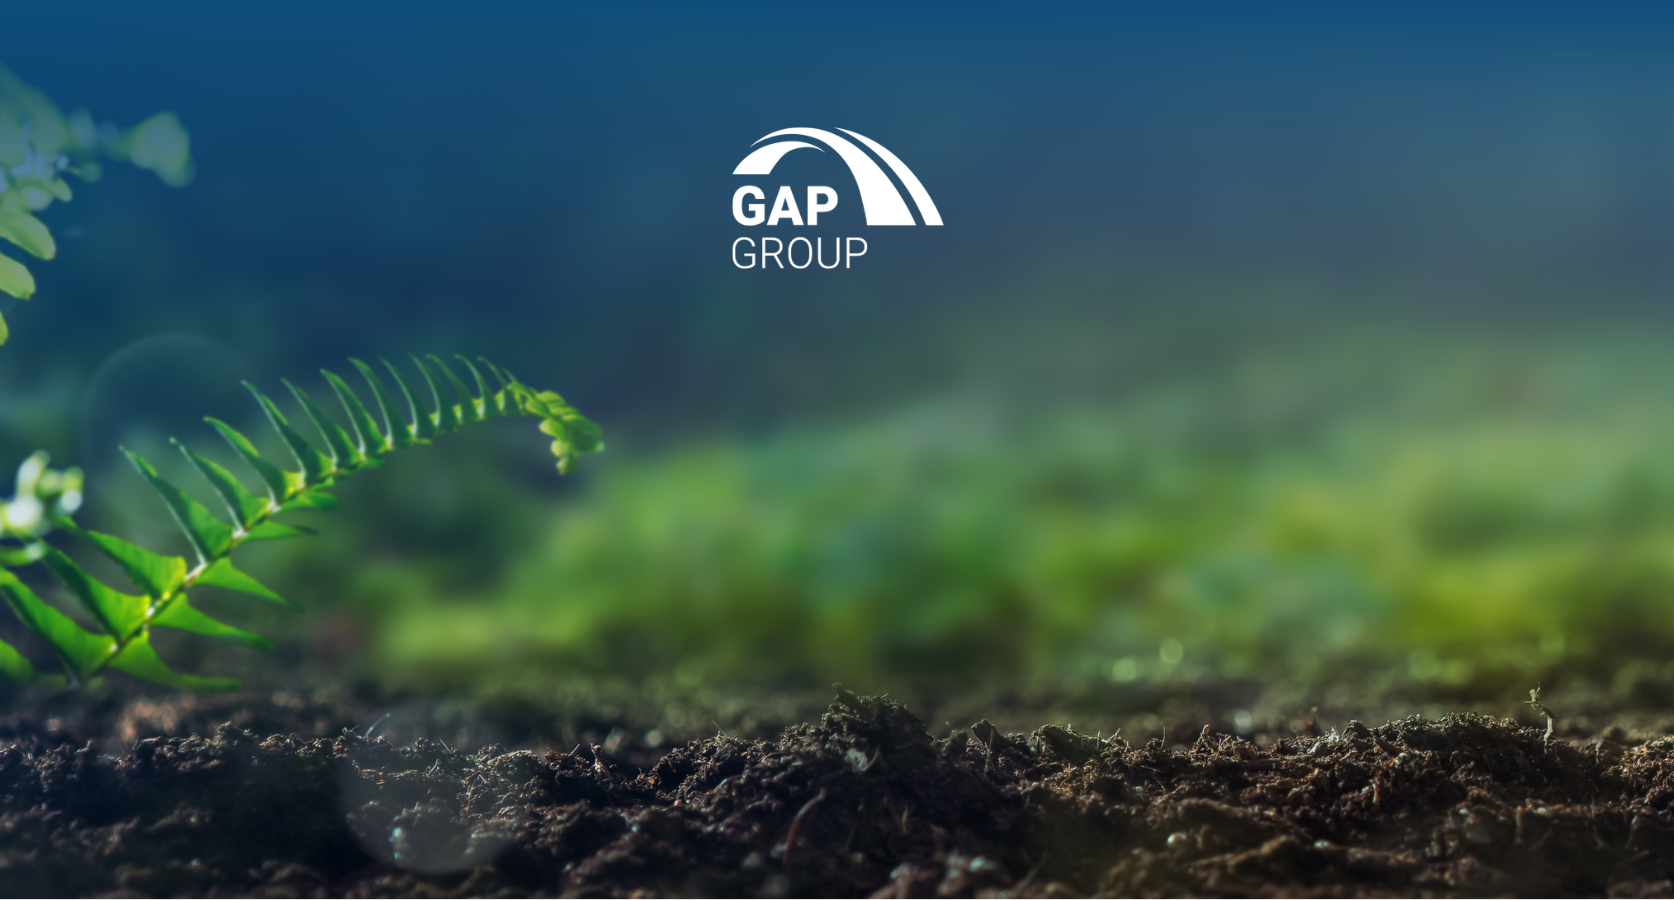 GAP Group North East Sets the Standard with a Clear Future Vision and Mission